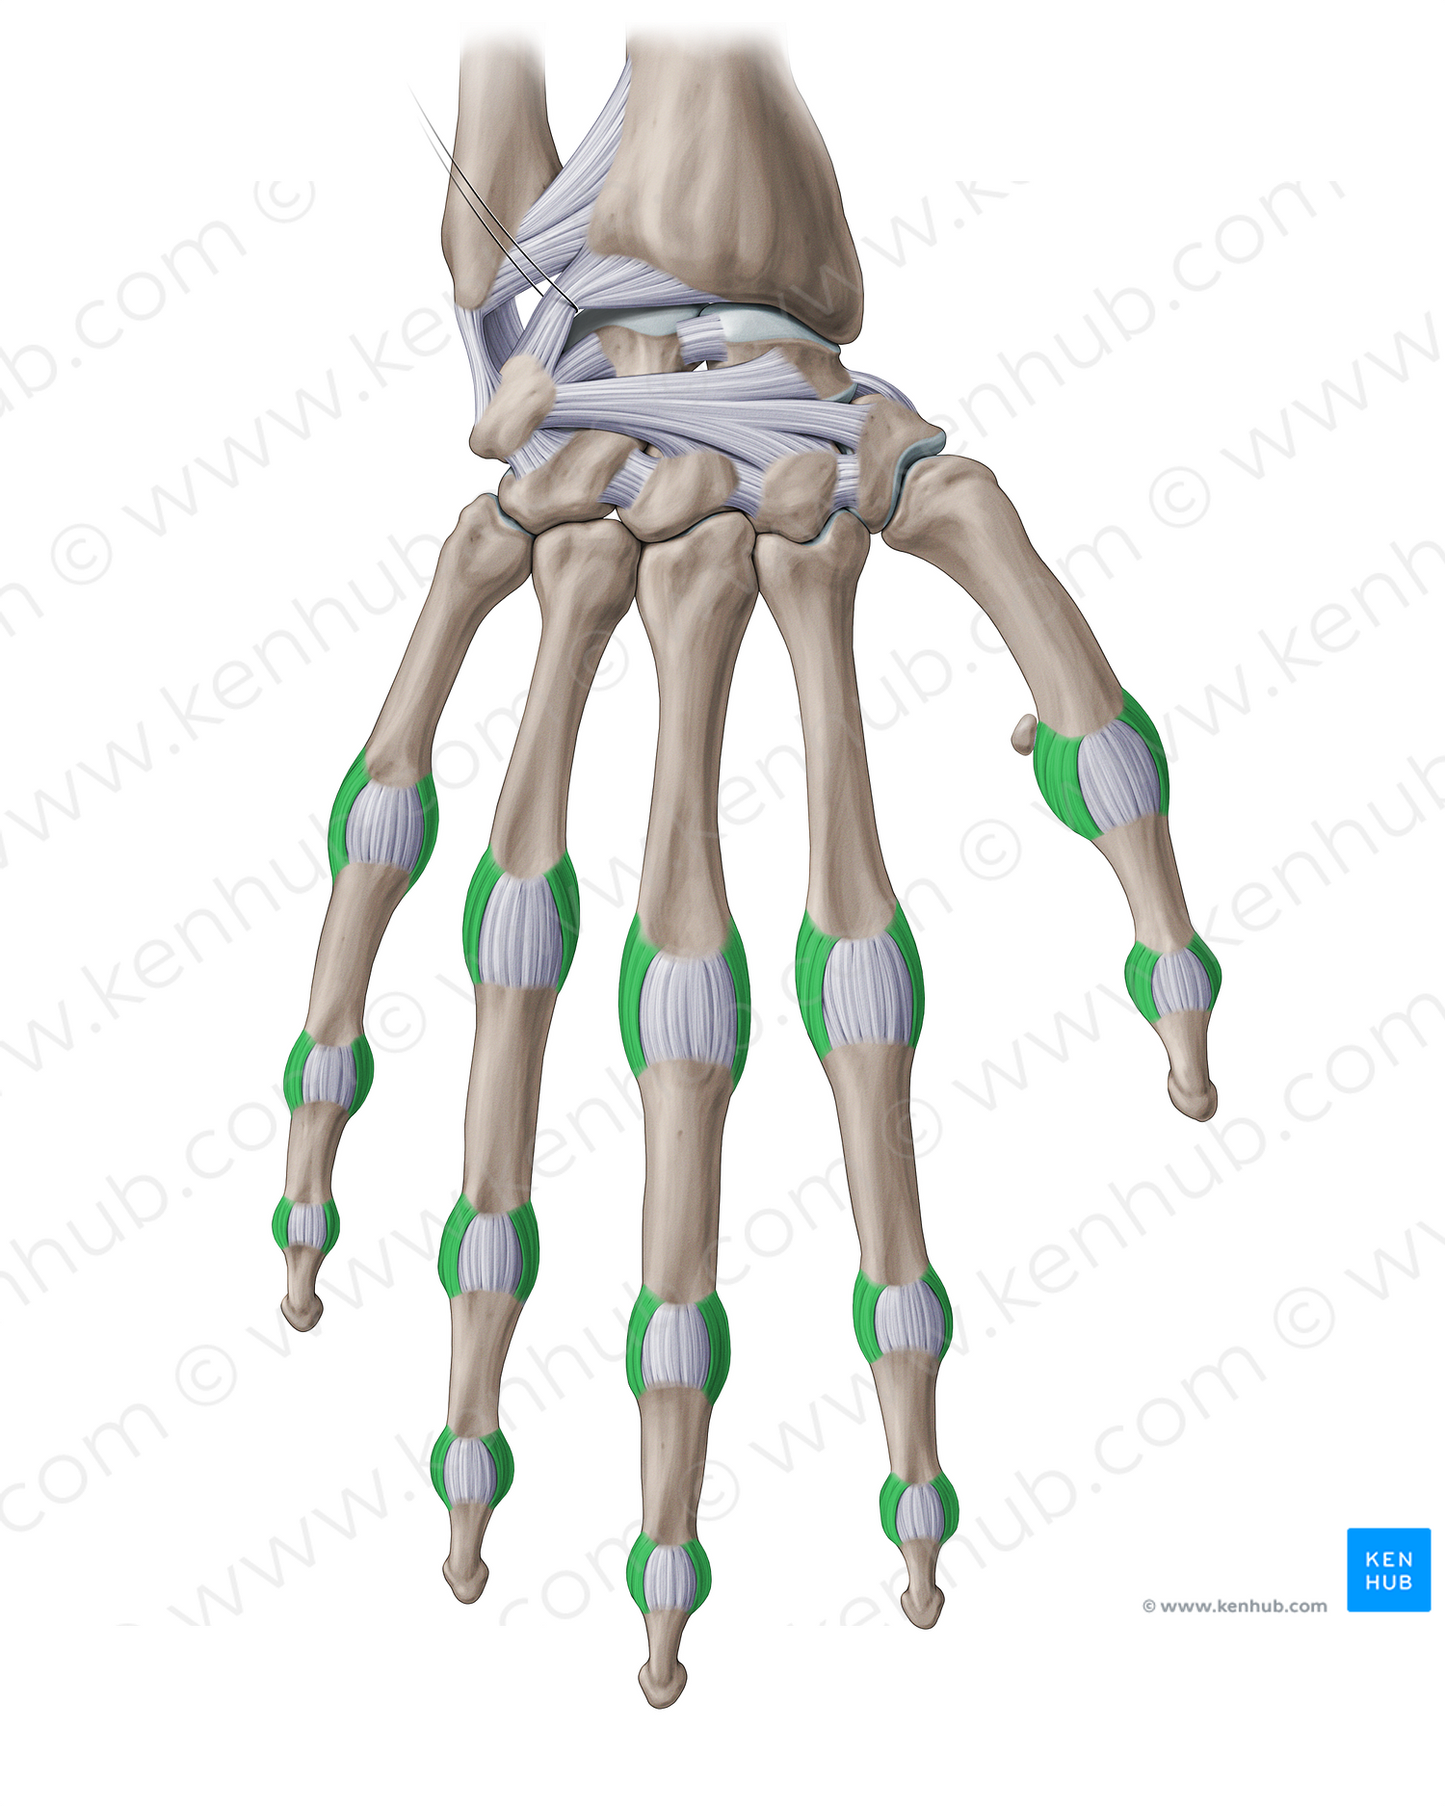 Proper collateral ligaments of hand (#20979)